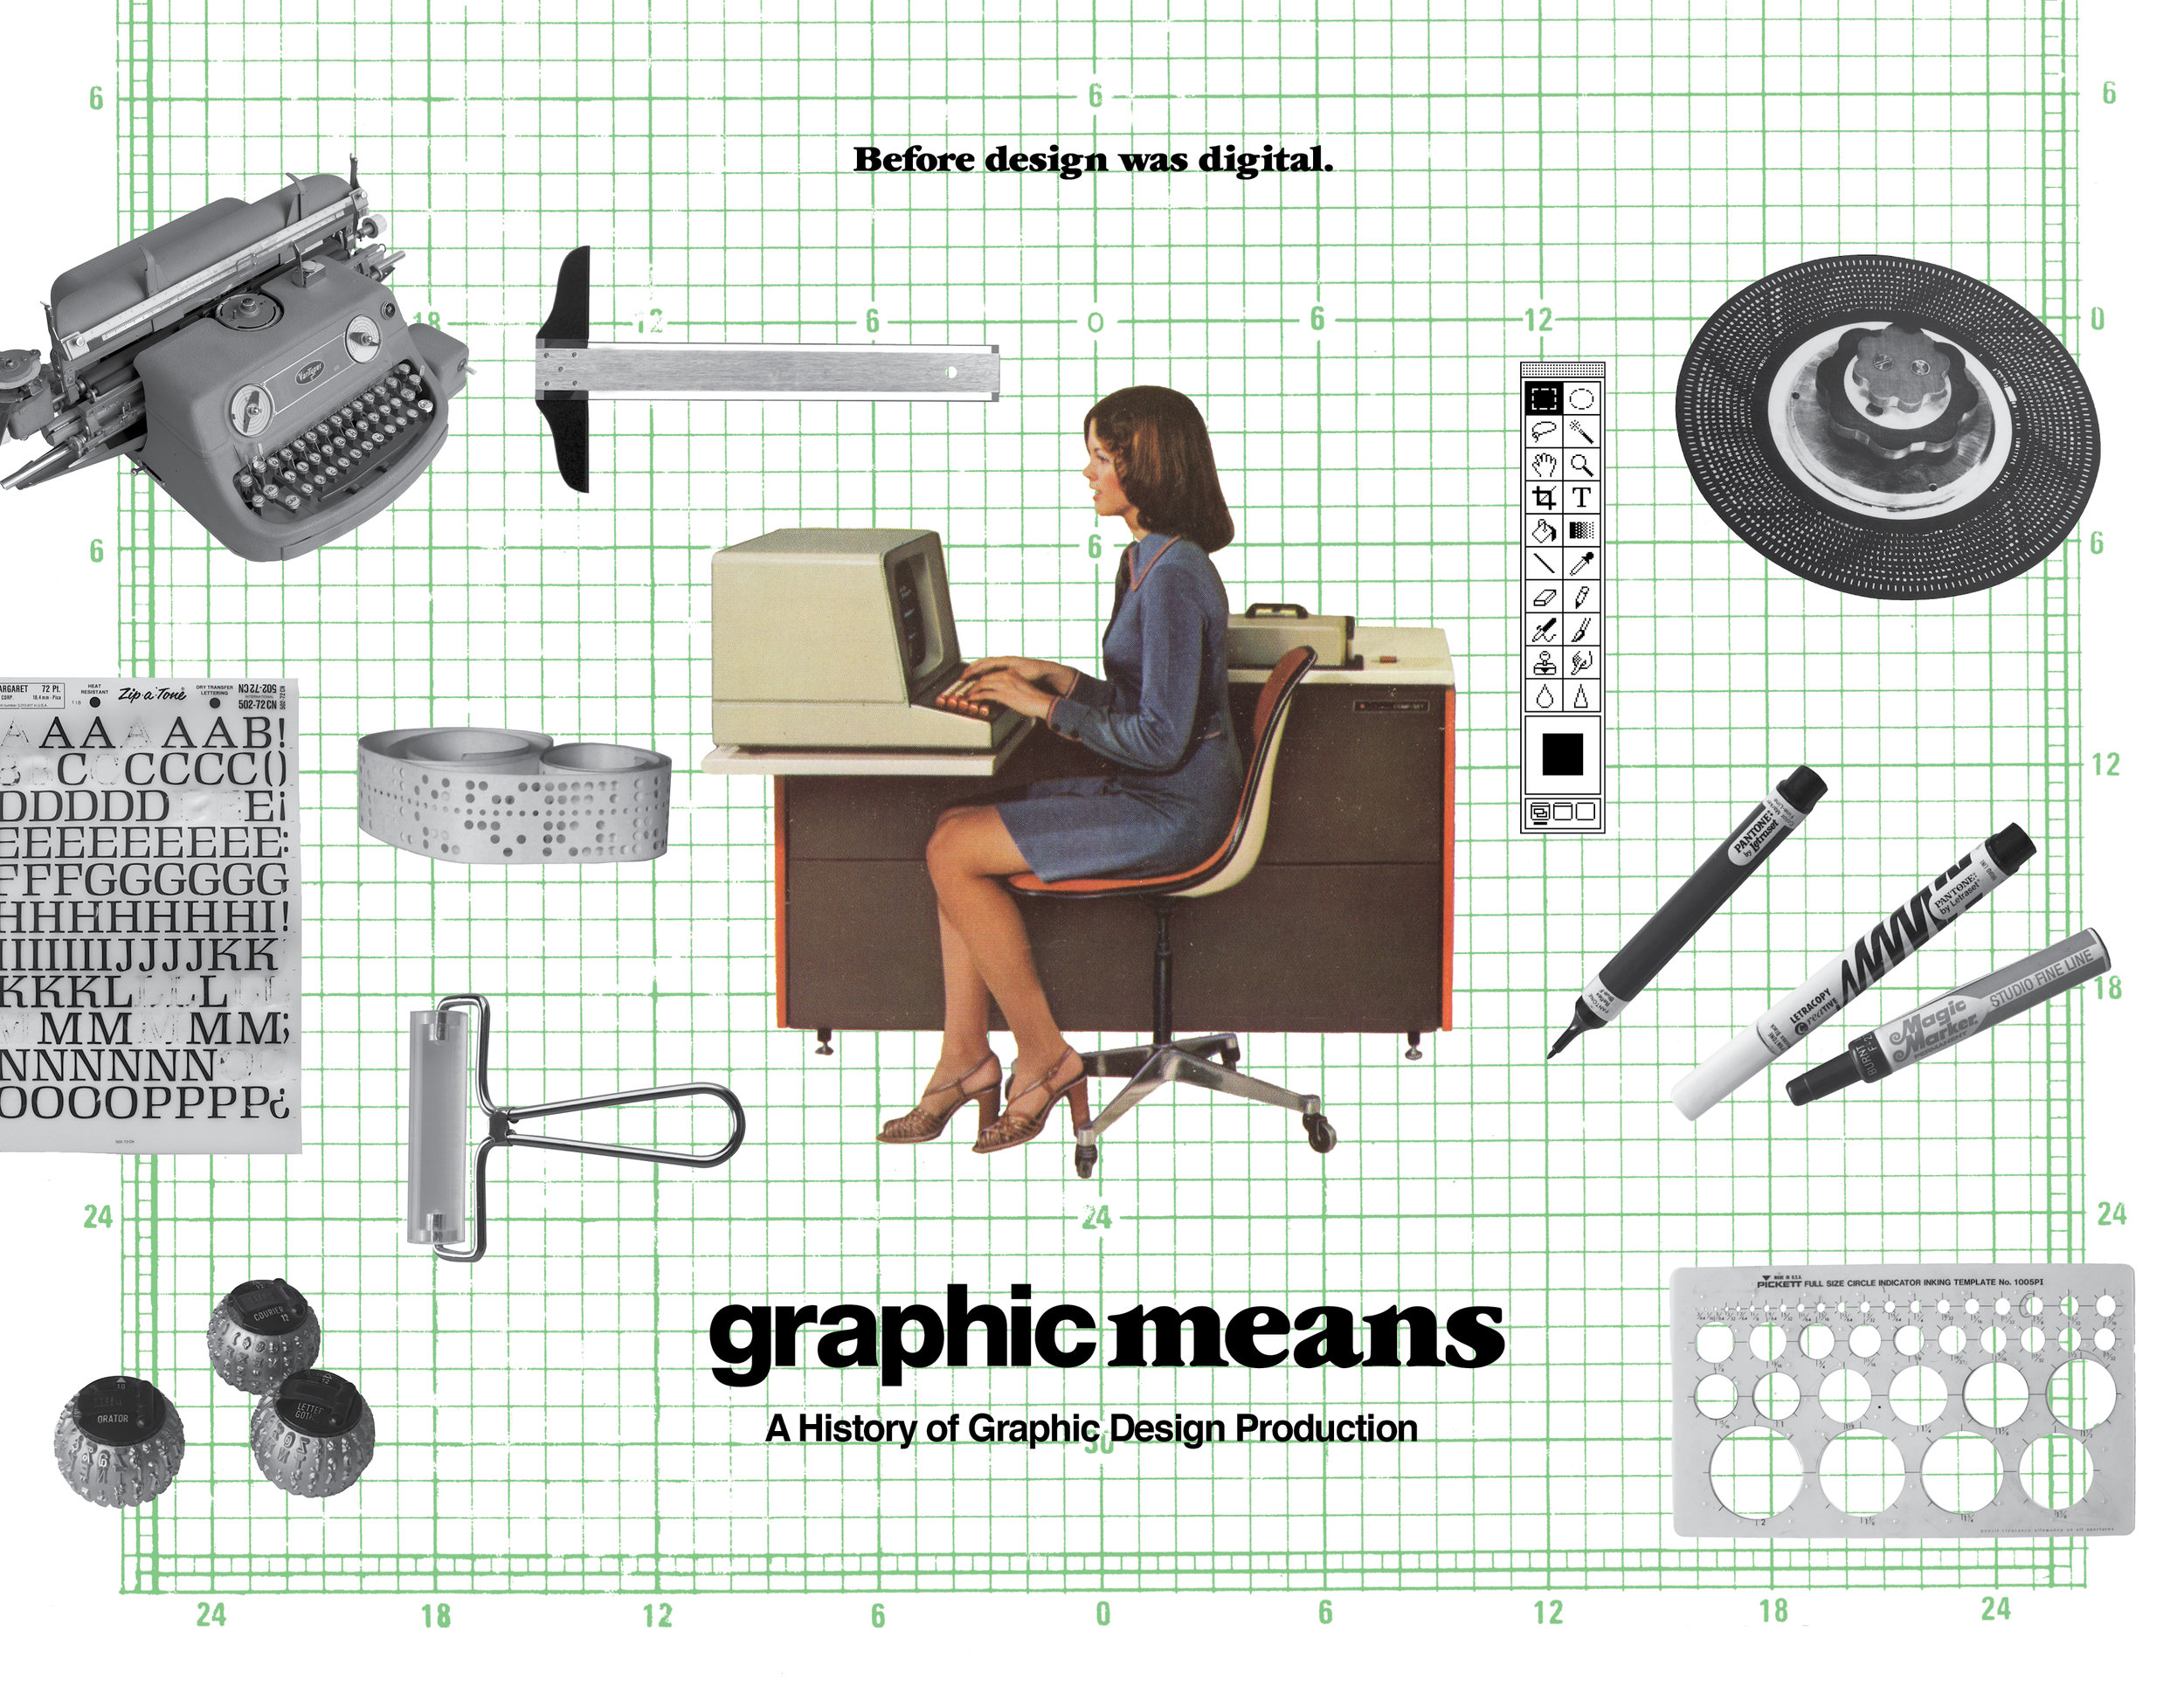 Graphic Means documentary